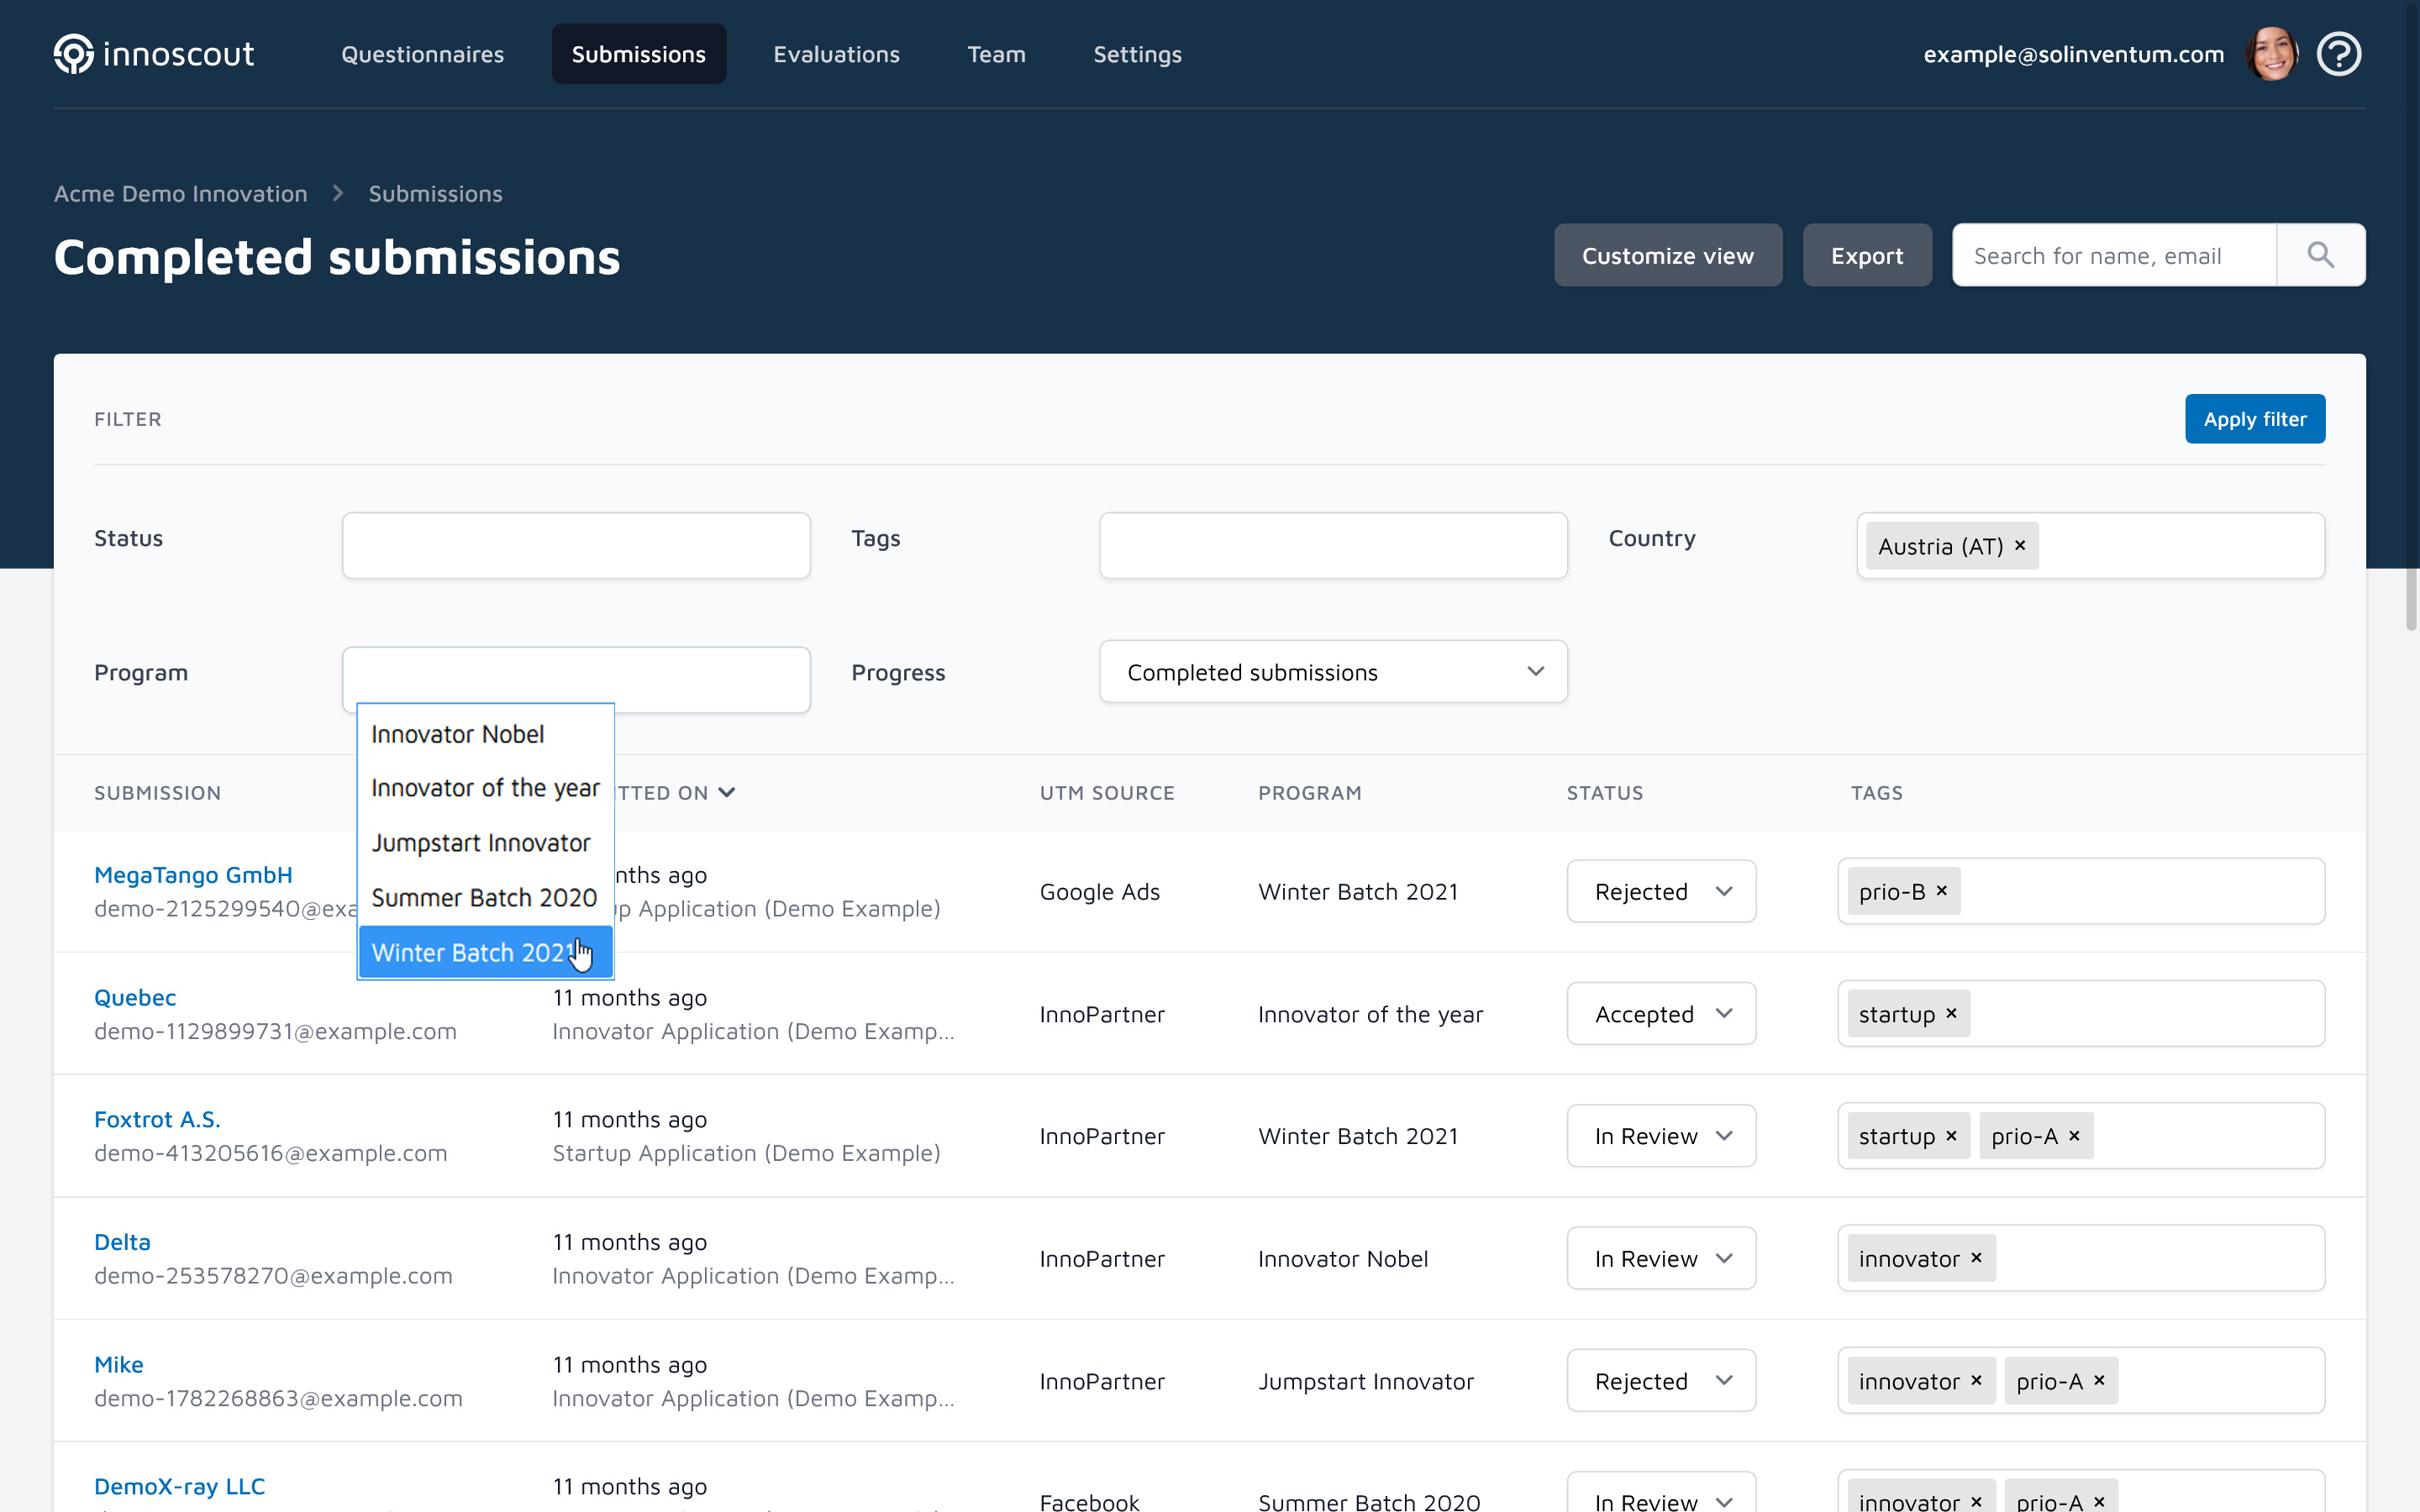 Screenshot of the Innoscout Innovation Scouting Platform